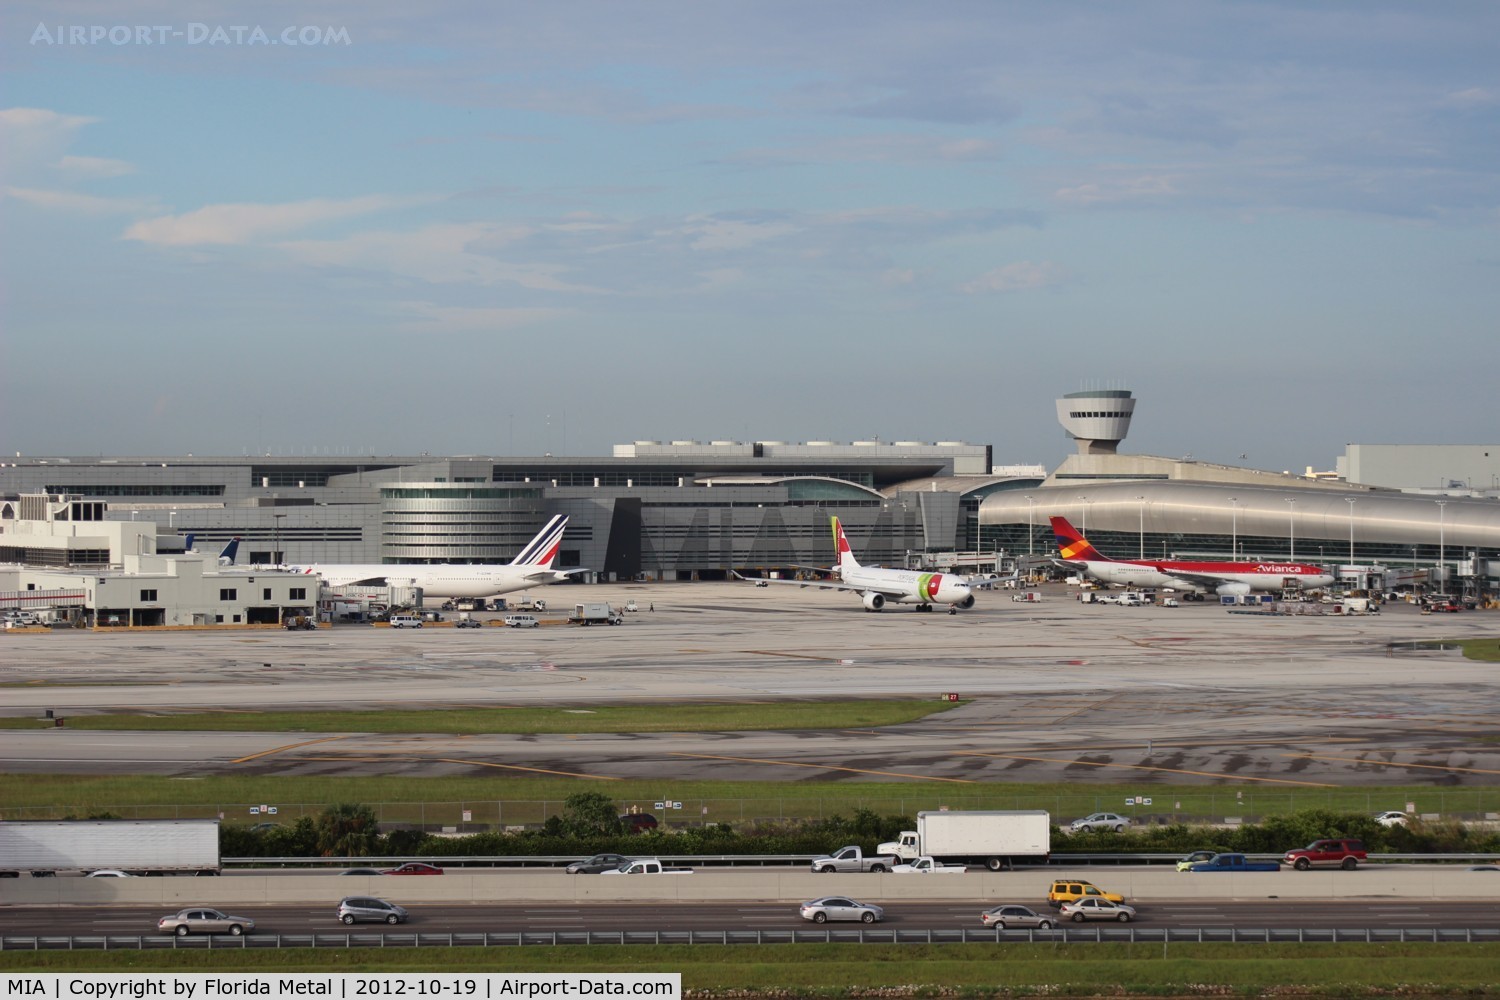 Miami International Airport (MIA) - TAP Air Portugal pulling out of the gate between Air France and Avianca